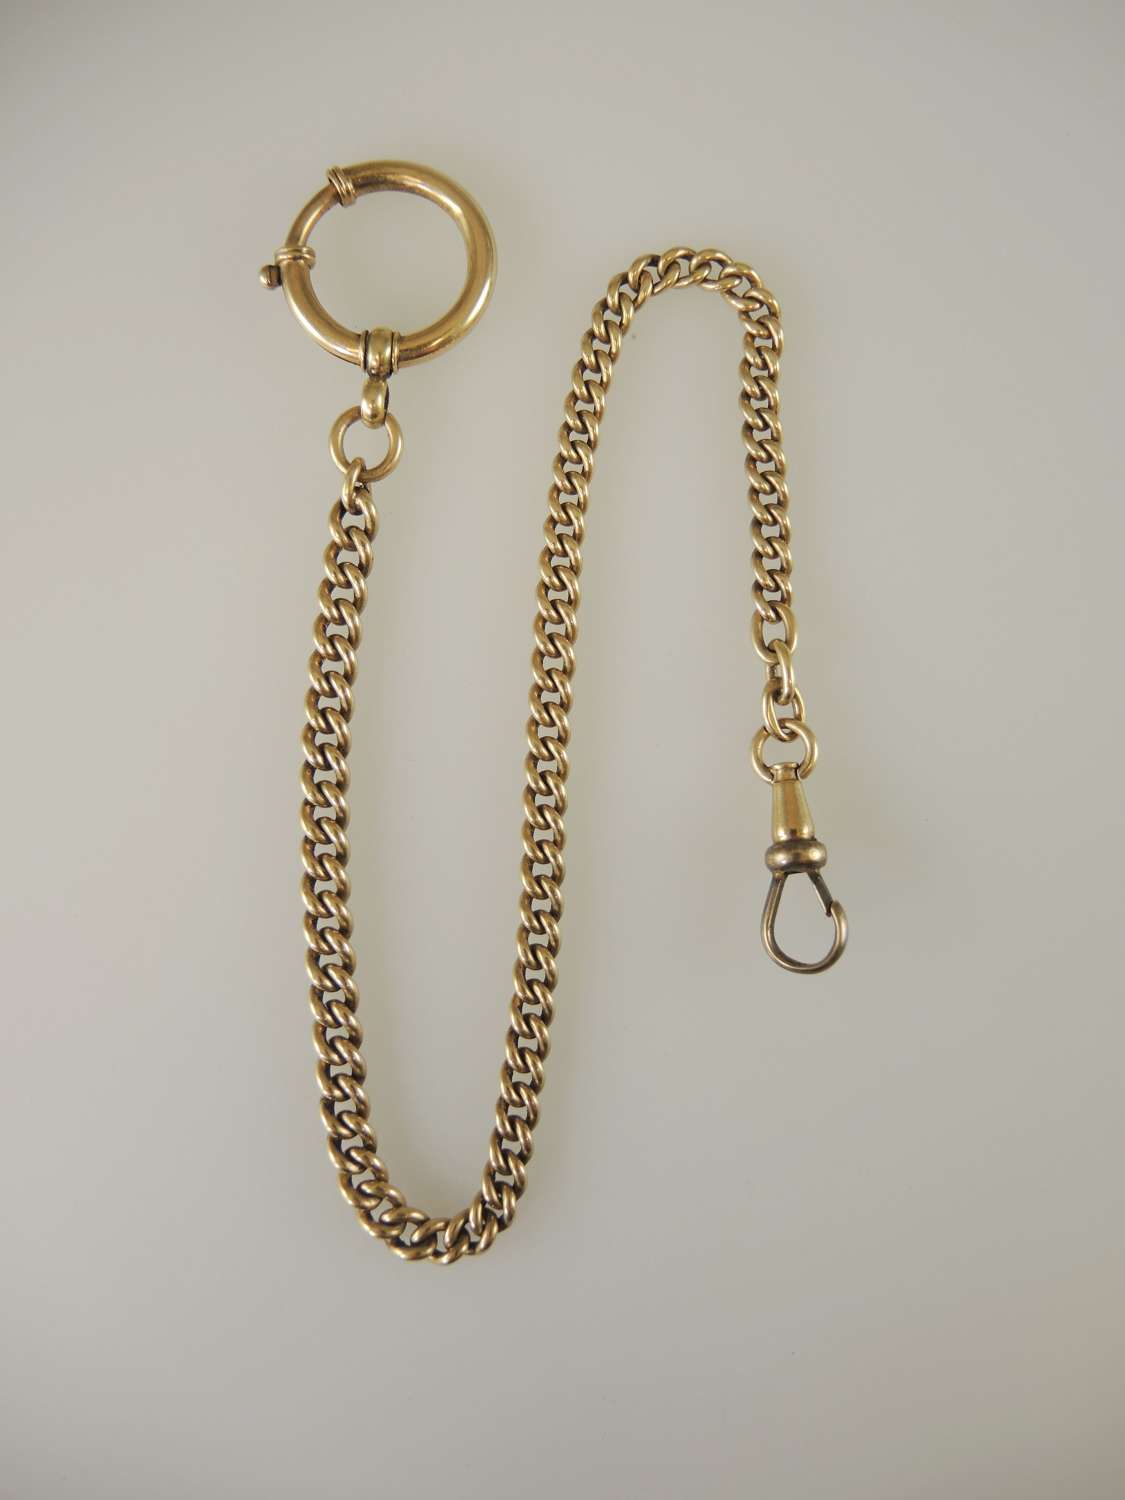 Solid 14K Gold Watch chain c1890